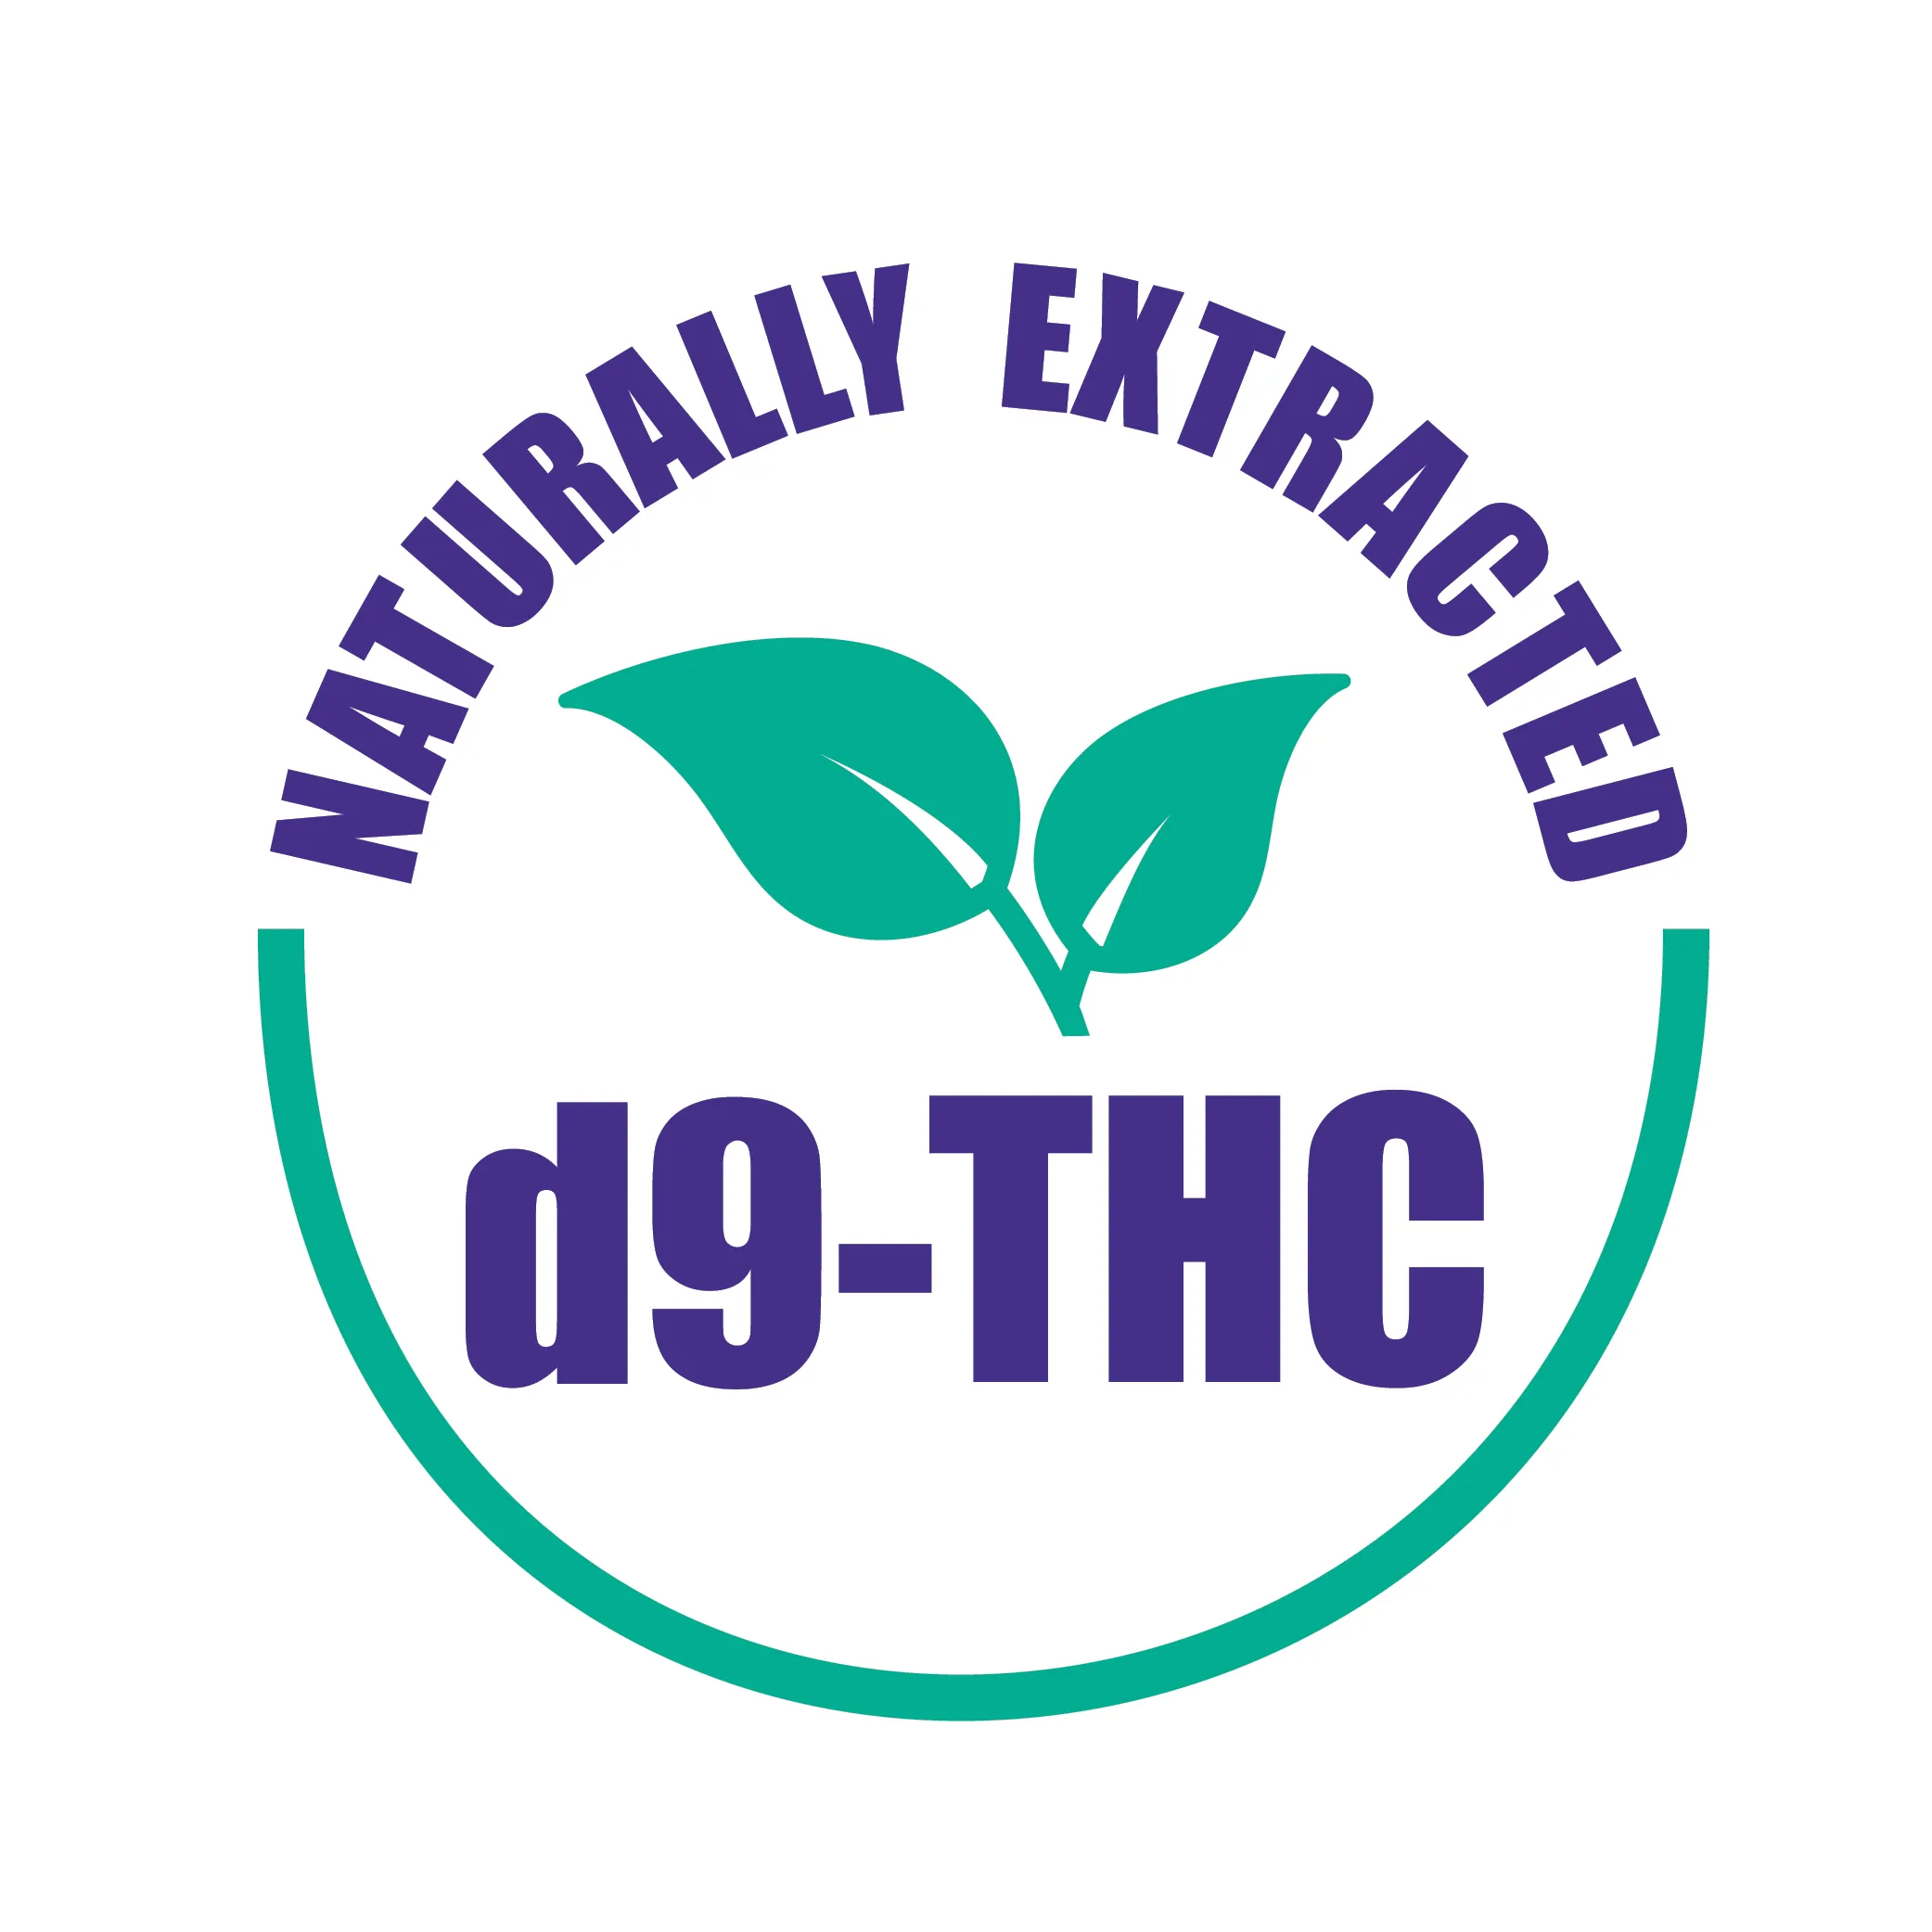 An icon that specifies Cantrip drinks are make with naturally-extracted d9-THC.